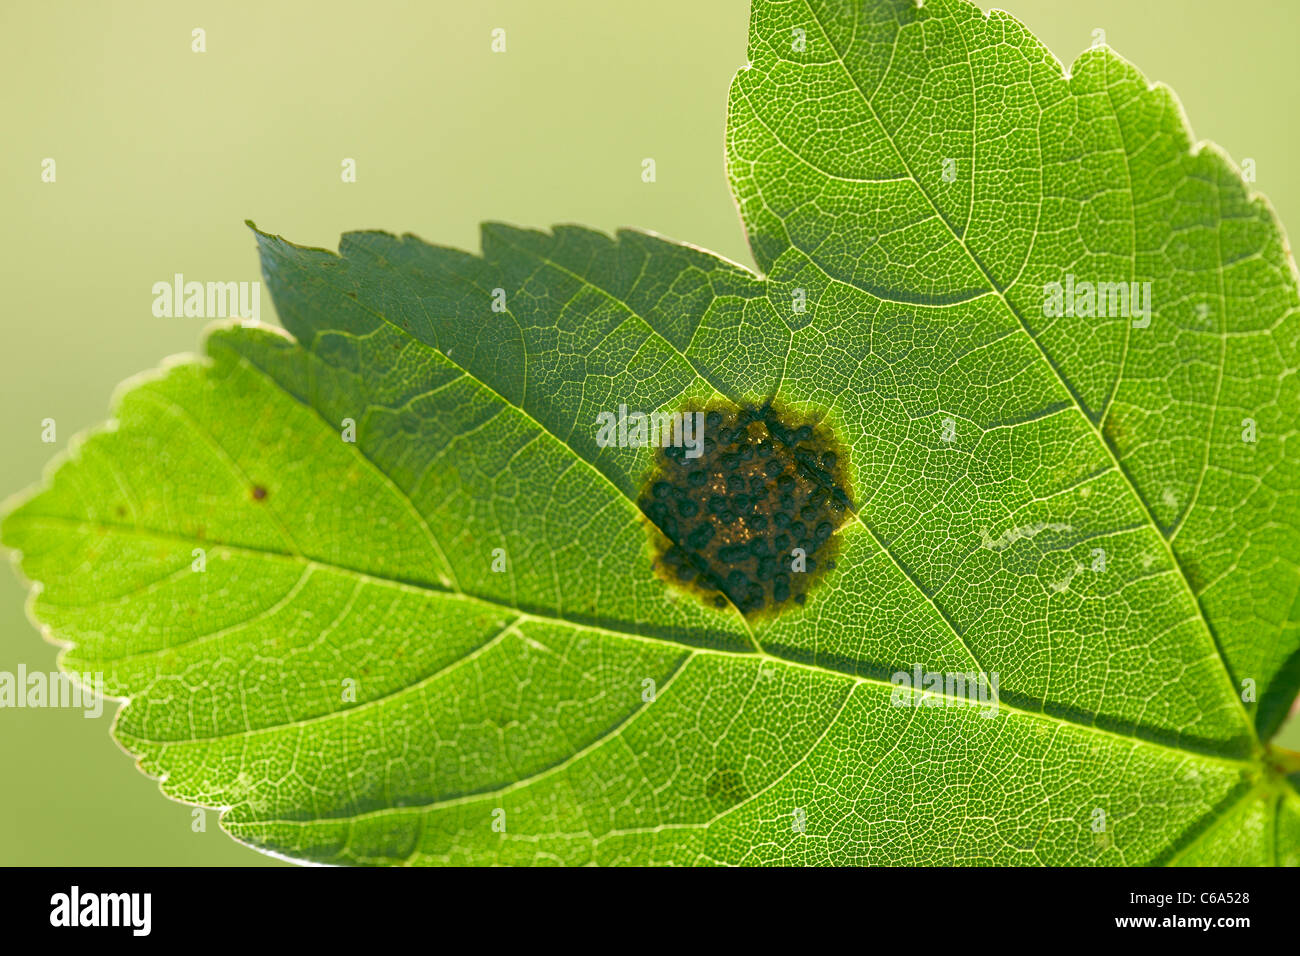 Tar spot on a Sycamore, Acer pseudoplatanus leaf caused by the fungus Rhytisma acerinum Stock Photo